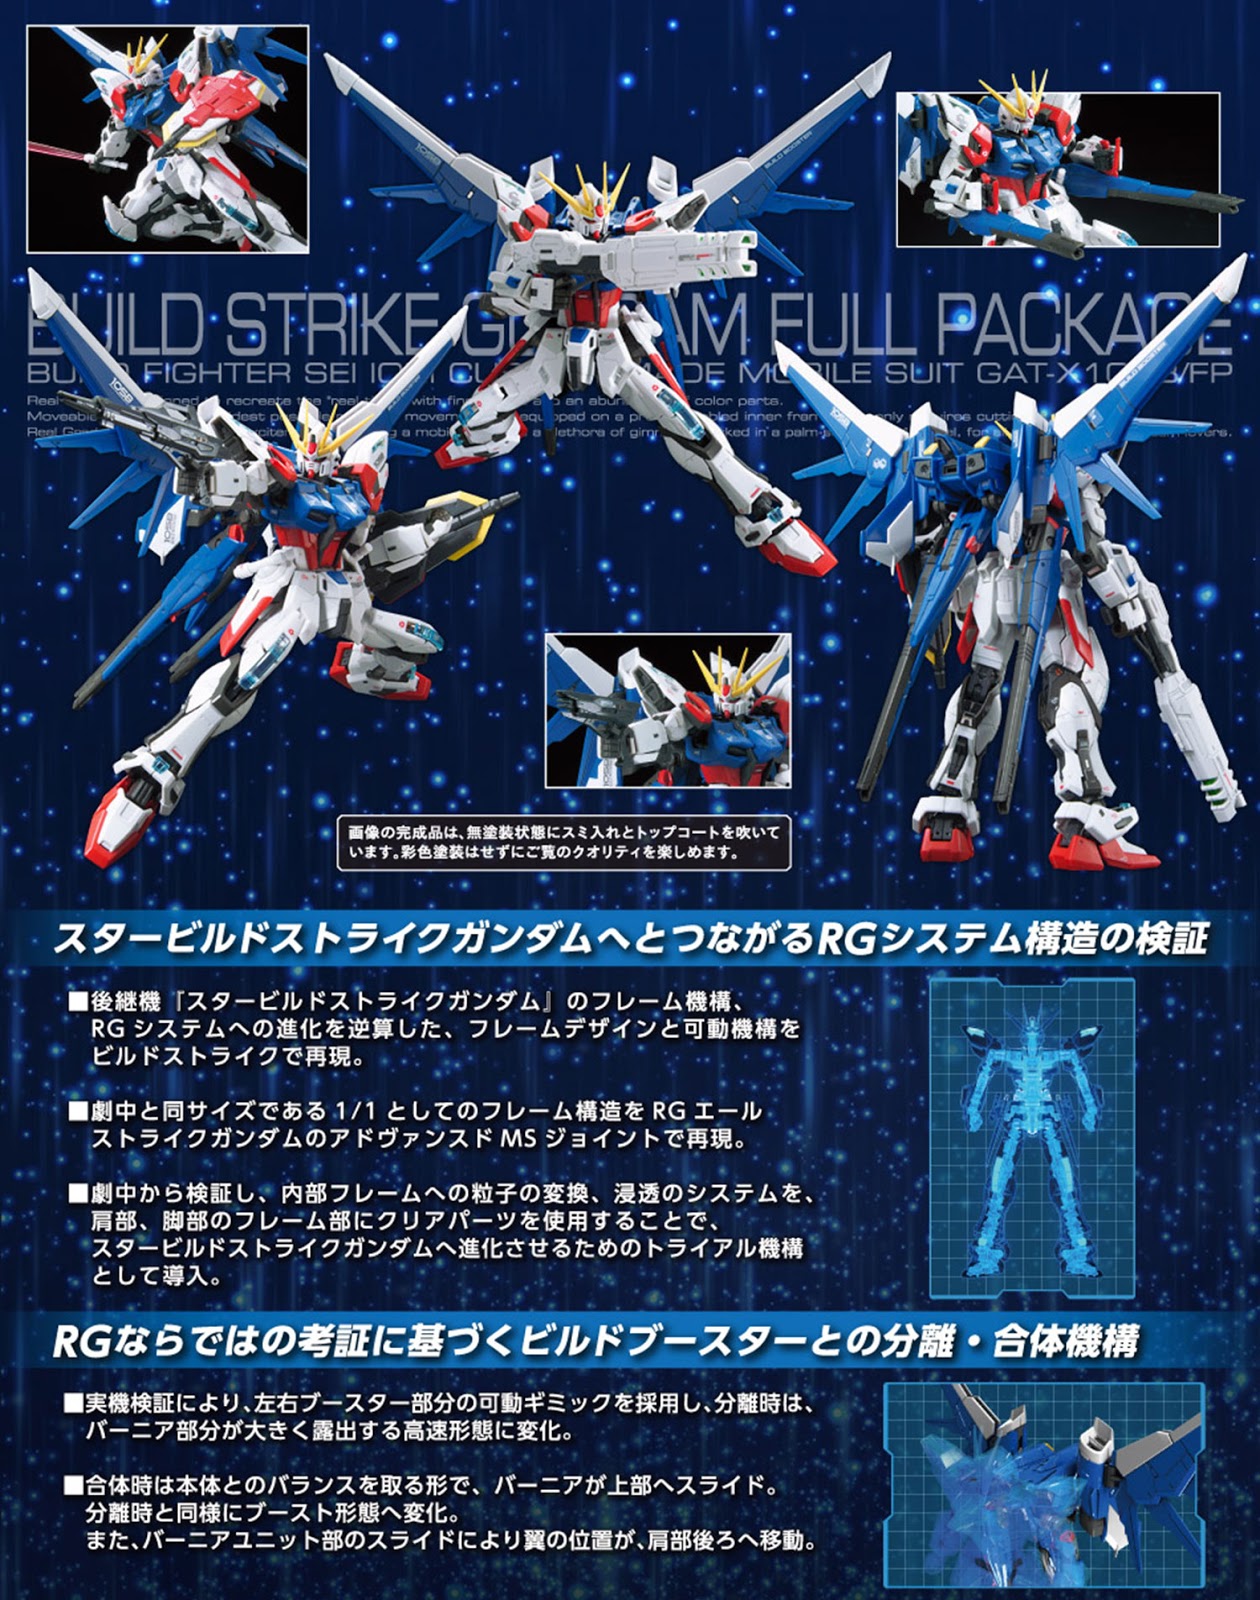 RG #23 1/144 Build Strike Gundam Full Package - Release Info, Box art and Official Images